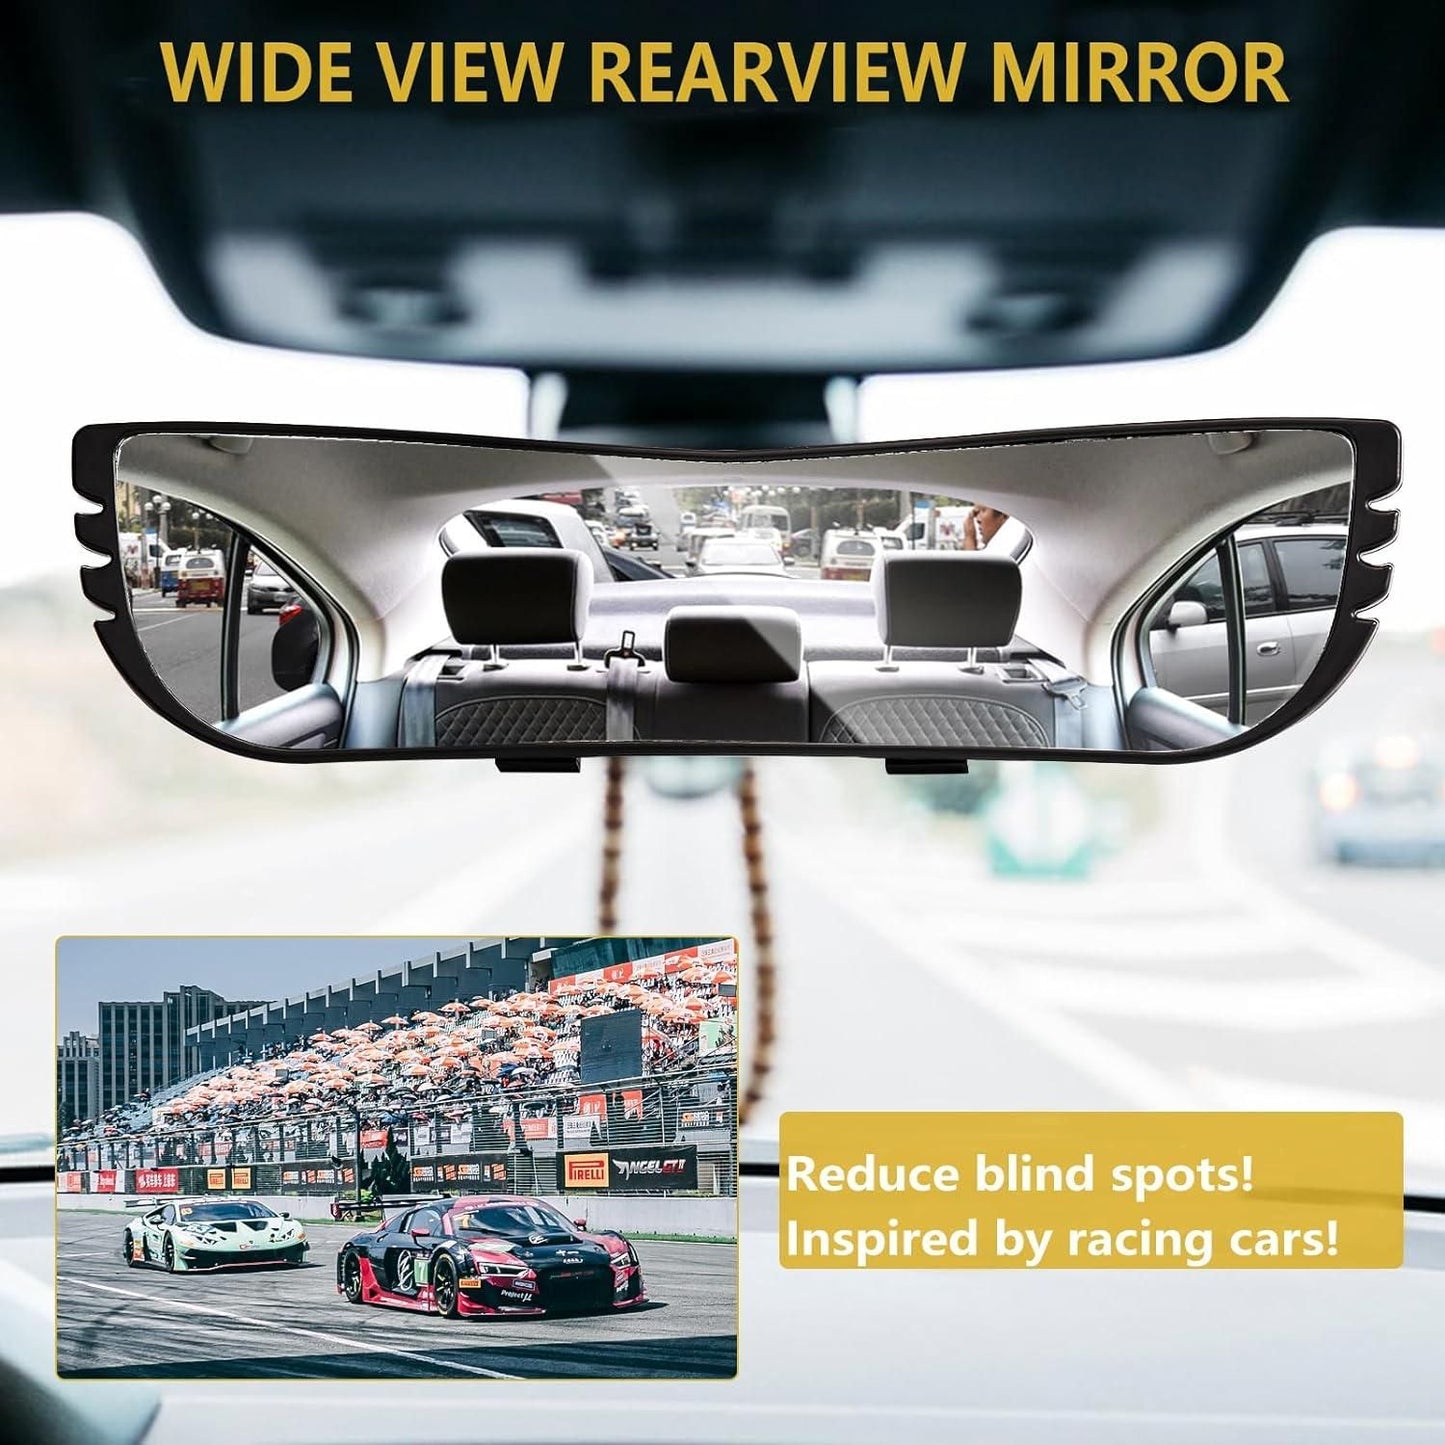 Wide Angle Rearview Mirror with Angel Vision